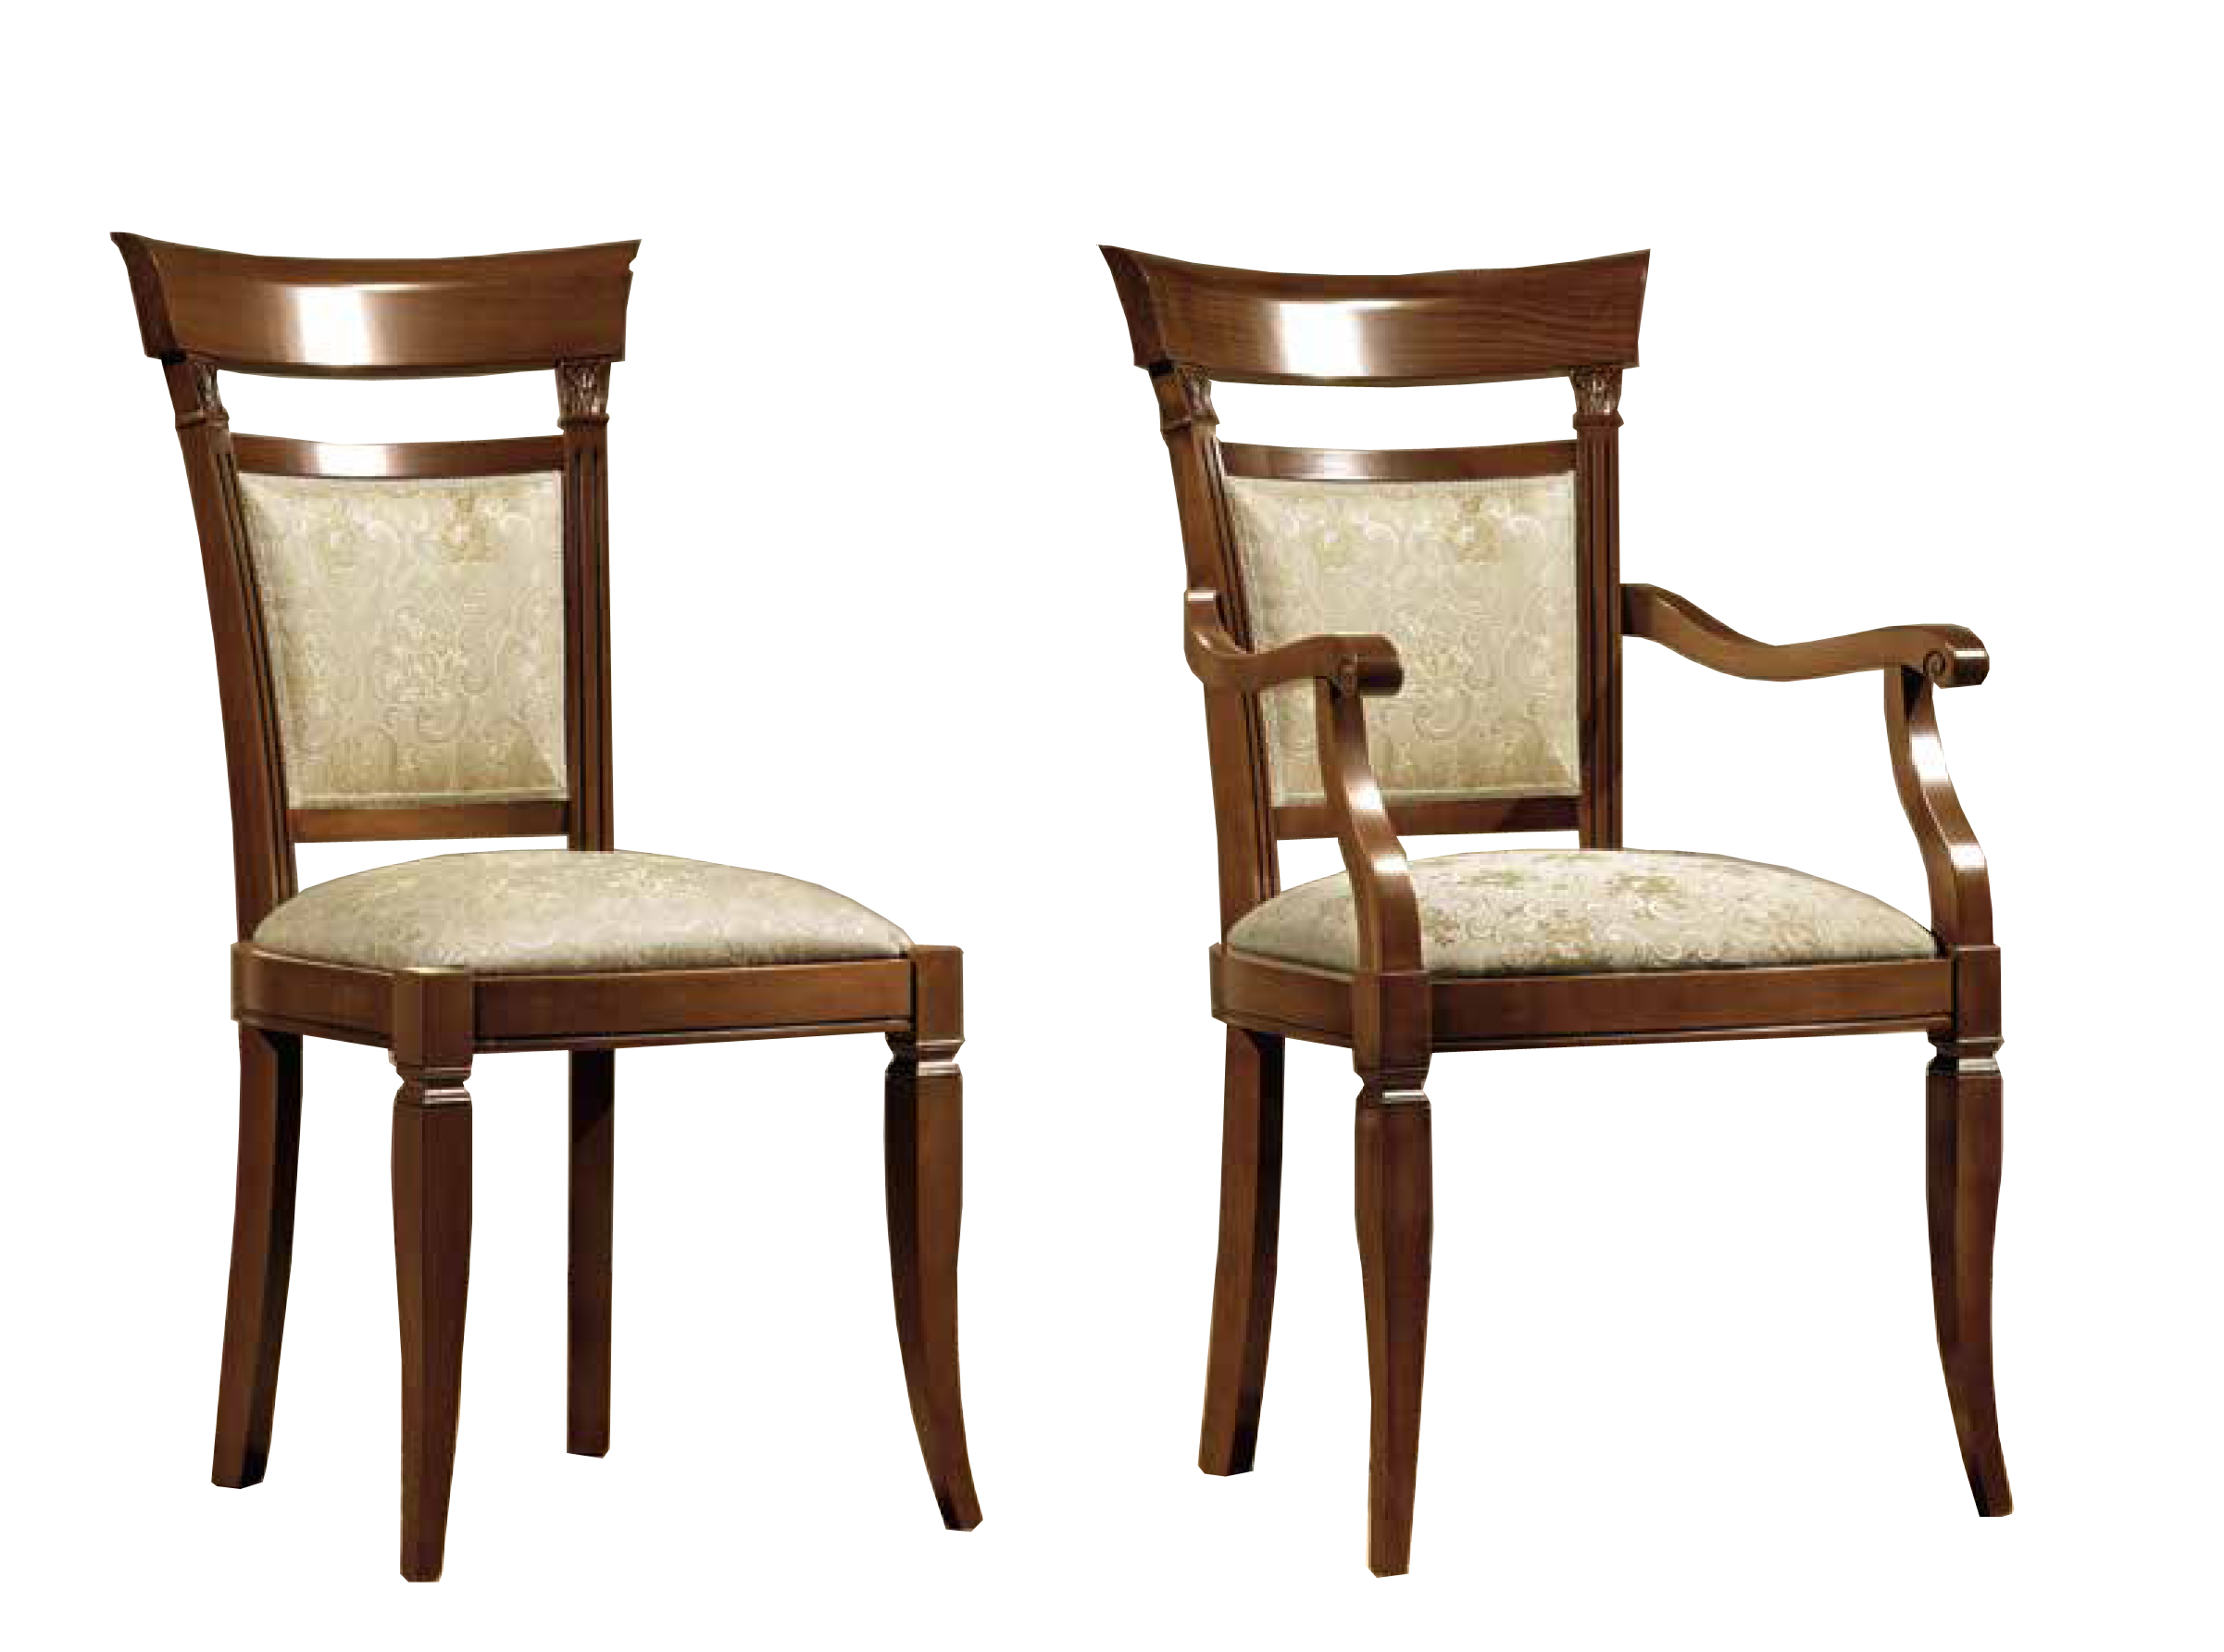 Dining Room Furniture Classic Dining Room Sets Treviso Chairs Cherry